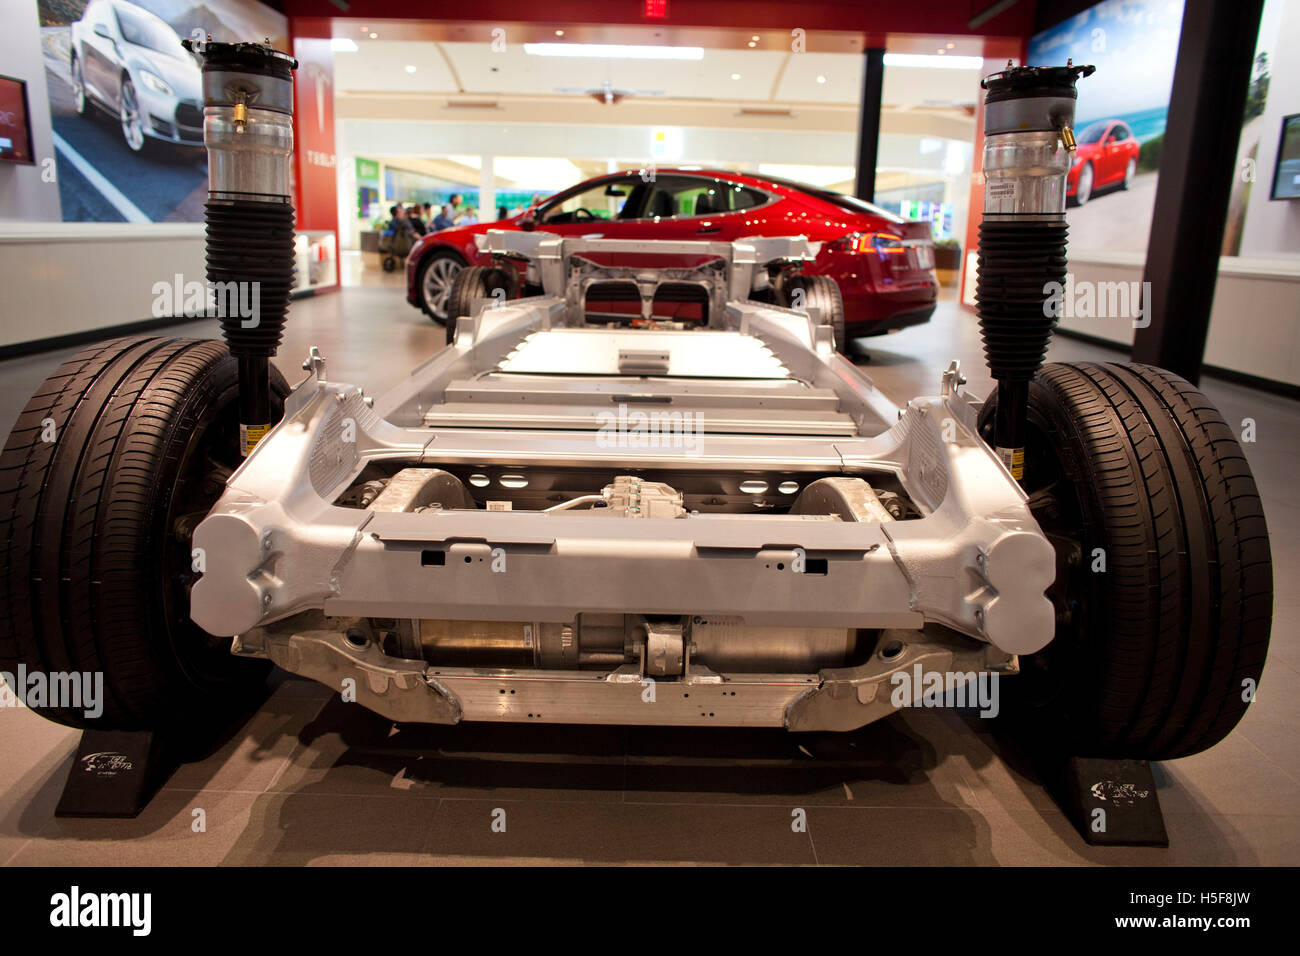 Mission Viejo, California, USA. 18th Mar, 2014. Tesla model S chassis and battery in the Mission Viejo mall showroom. Under a new law, Tesla Motors cannot sell cars directly to consumers in New Jersey effective April 1. Tesla has no existing franchised dealers with which its factory sales compete, and Tesla states that it is selling something so unique that an entirely different sales model is necessary. Currently New Jersey, Arizona, Maryland, Texas and Virginia ban direct sales of Tesla cars to consumers. The bulk of new car sales in the United States go through independently owned dealer Stock Photo